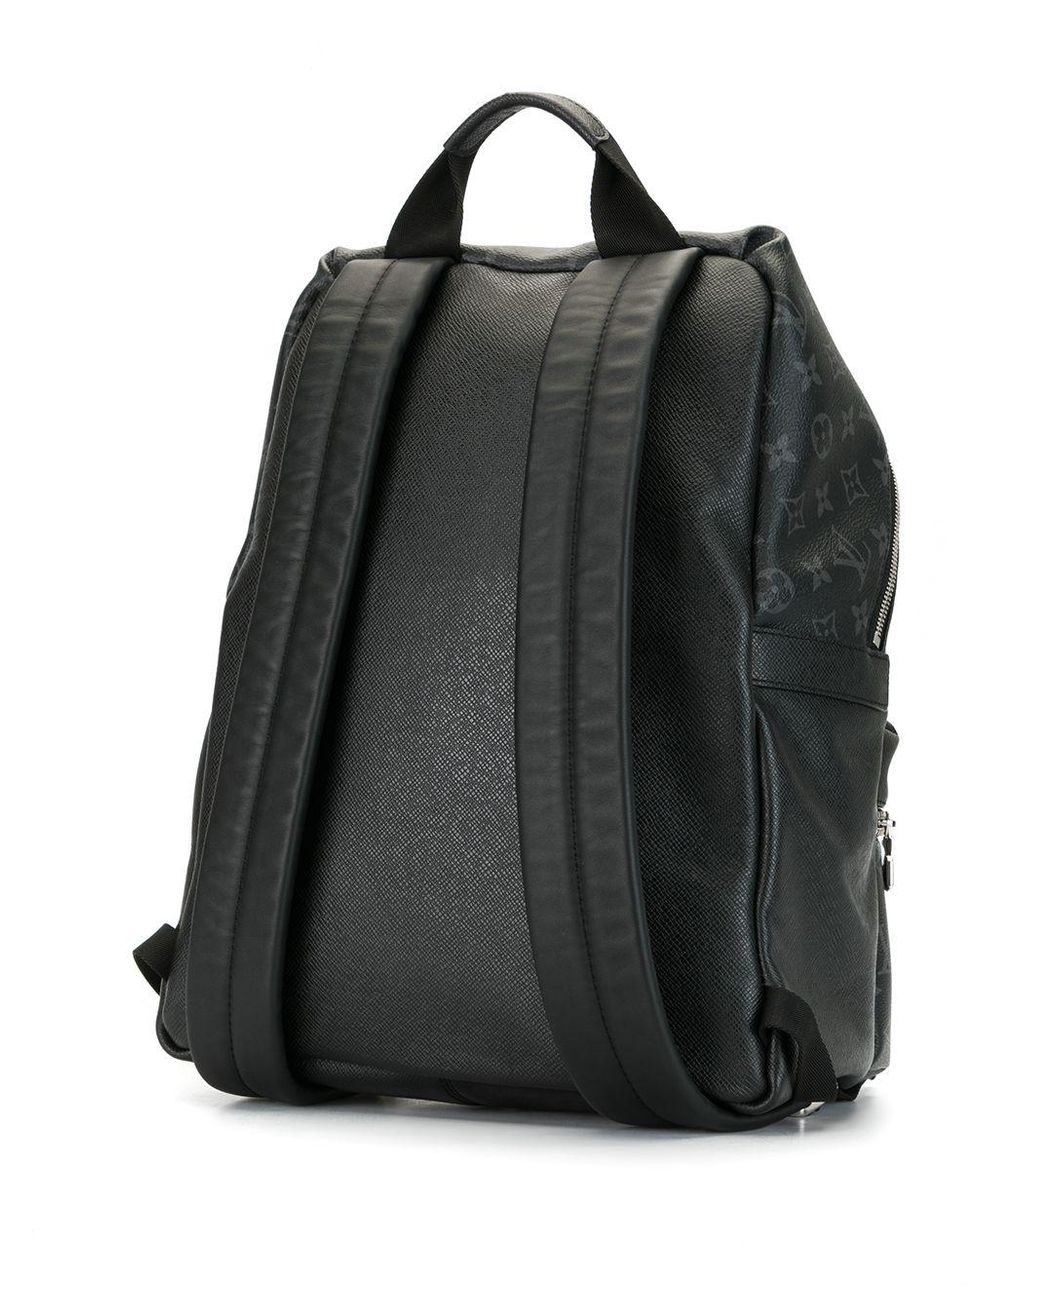 Louis Vuitton 2019 Discovery Backpack in Black for Men